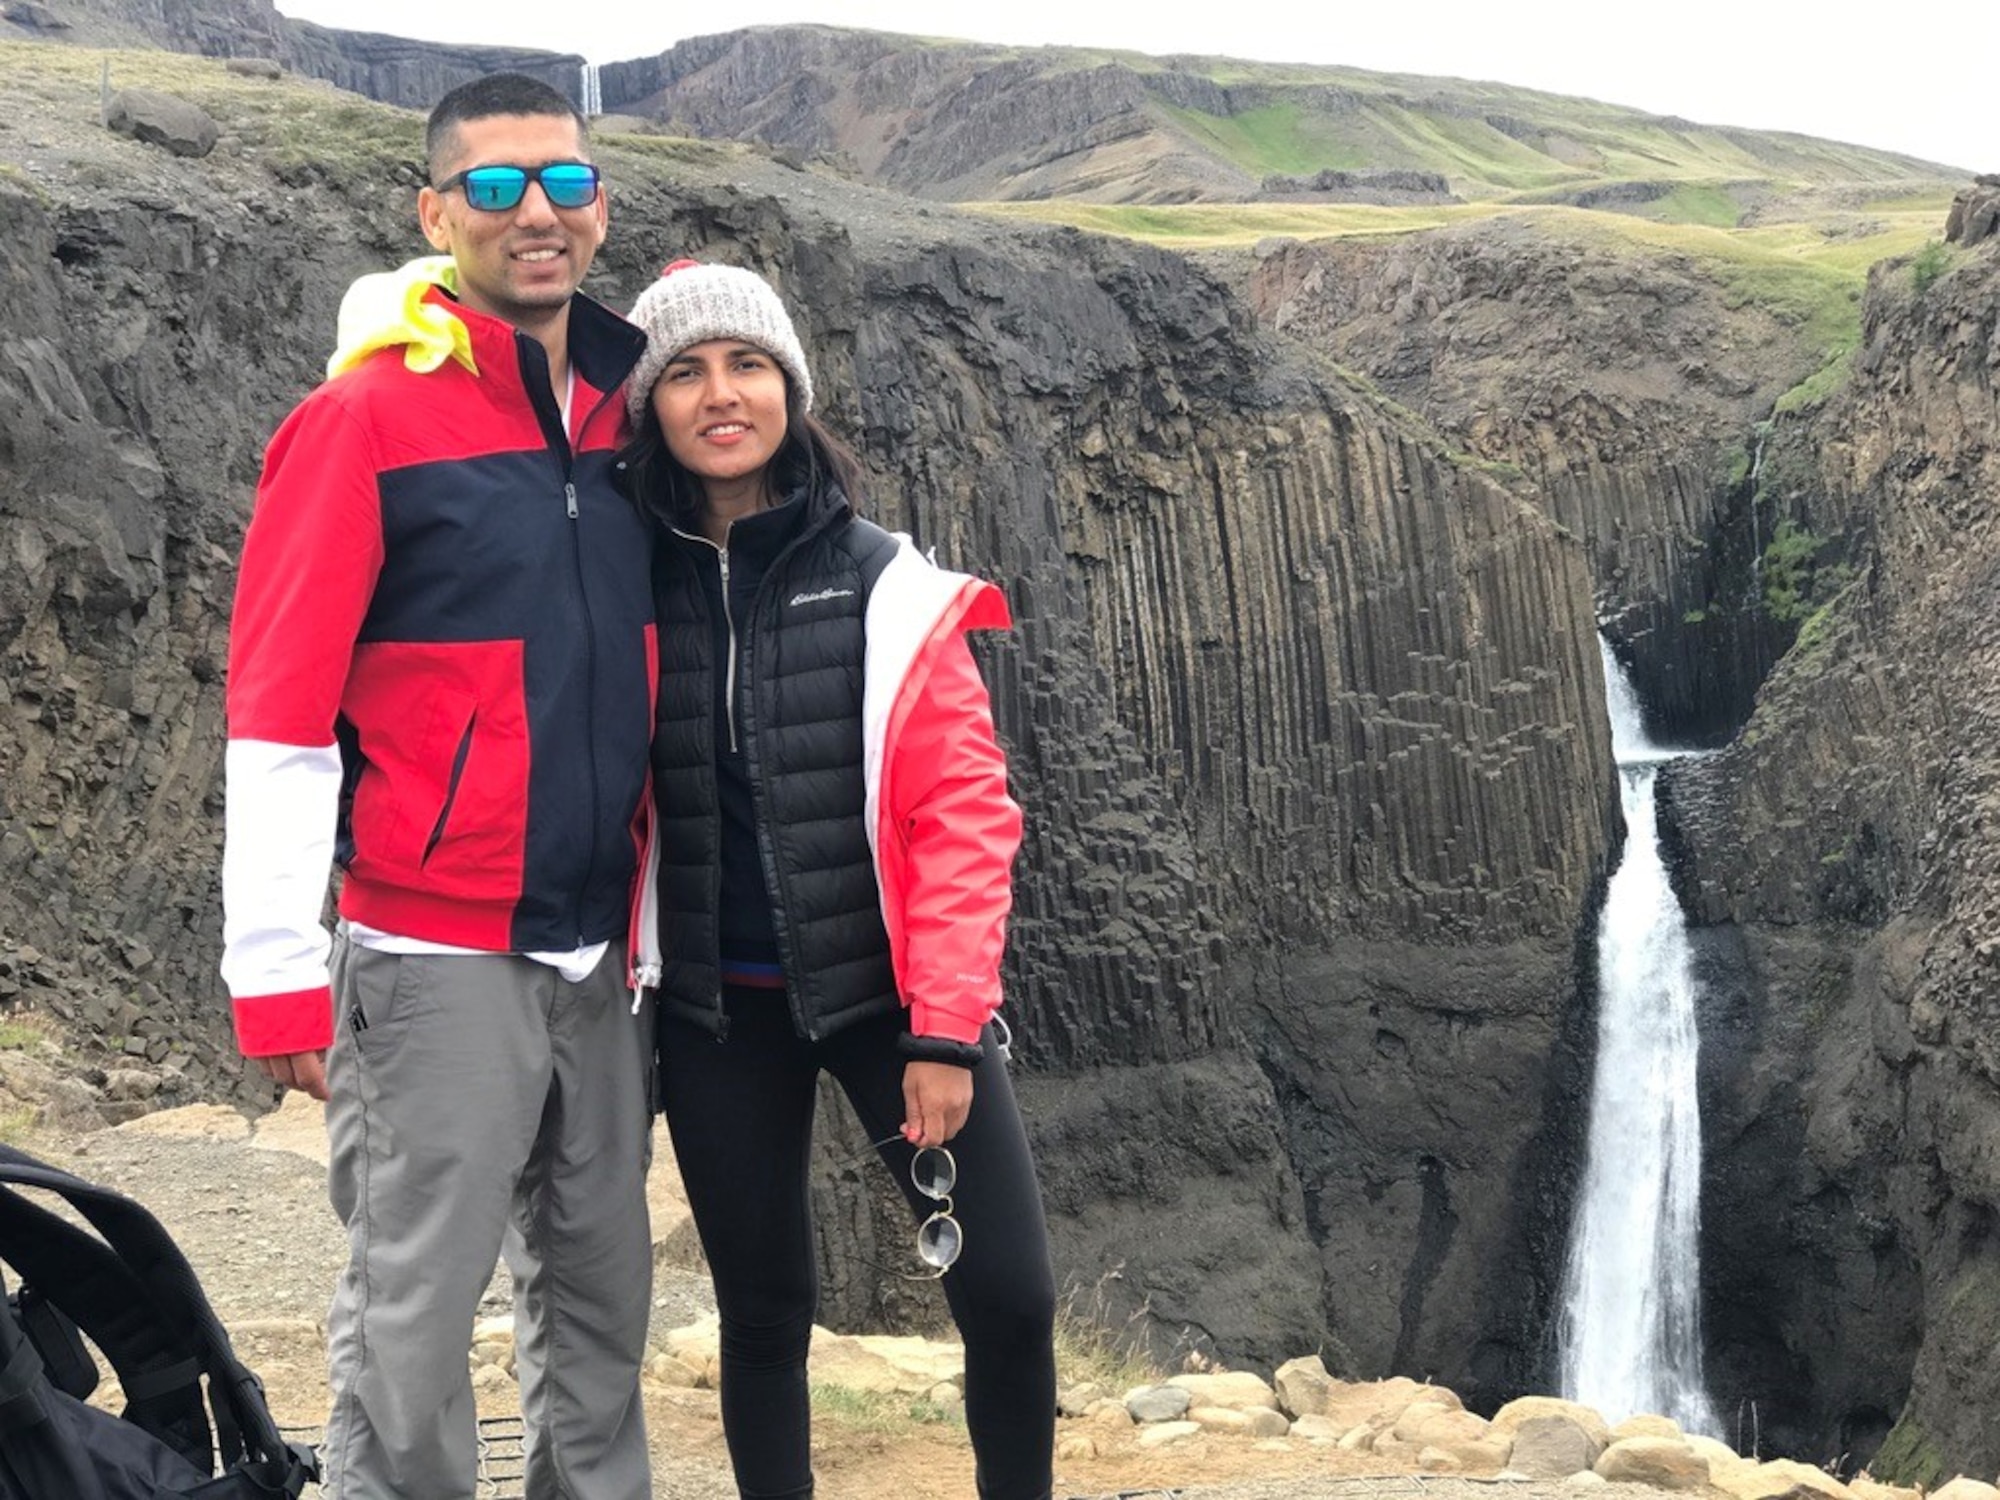 U.S. Air Force Senior Airman Sukh Bhandari, an aerospace ground equipment journeyman assigned to the 509th Maintenance Squadron at Whiteman Air Force Base, Missouri, travels the world to experience new sights, cultures, and environments in his free time.